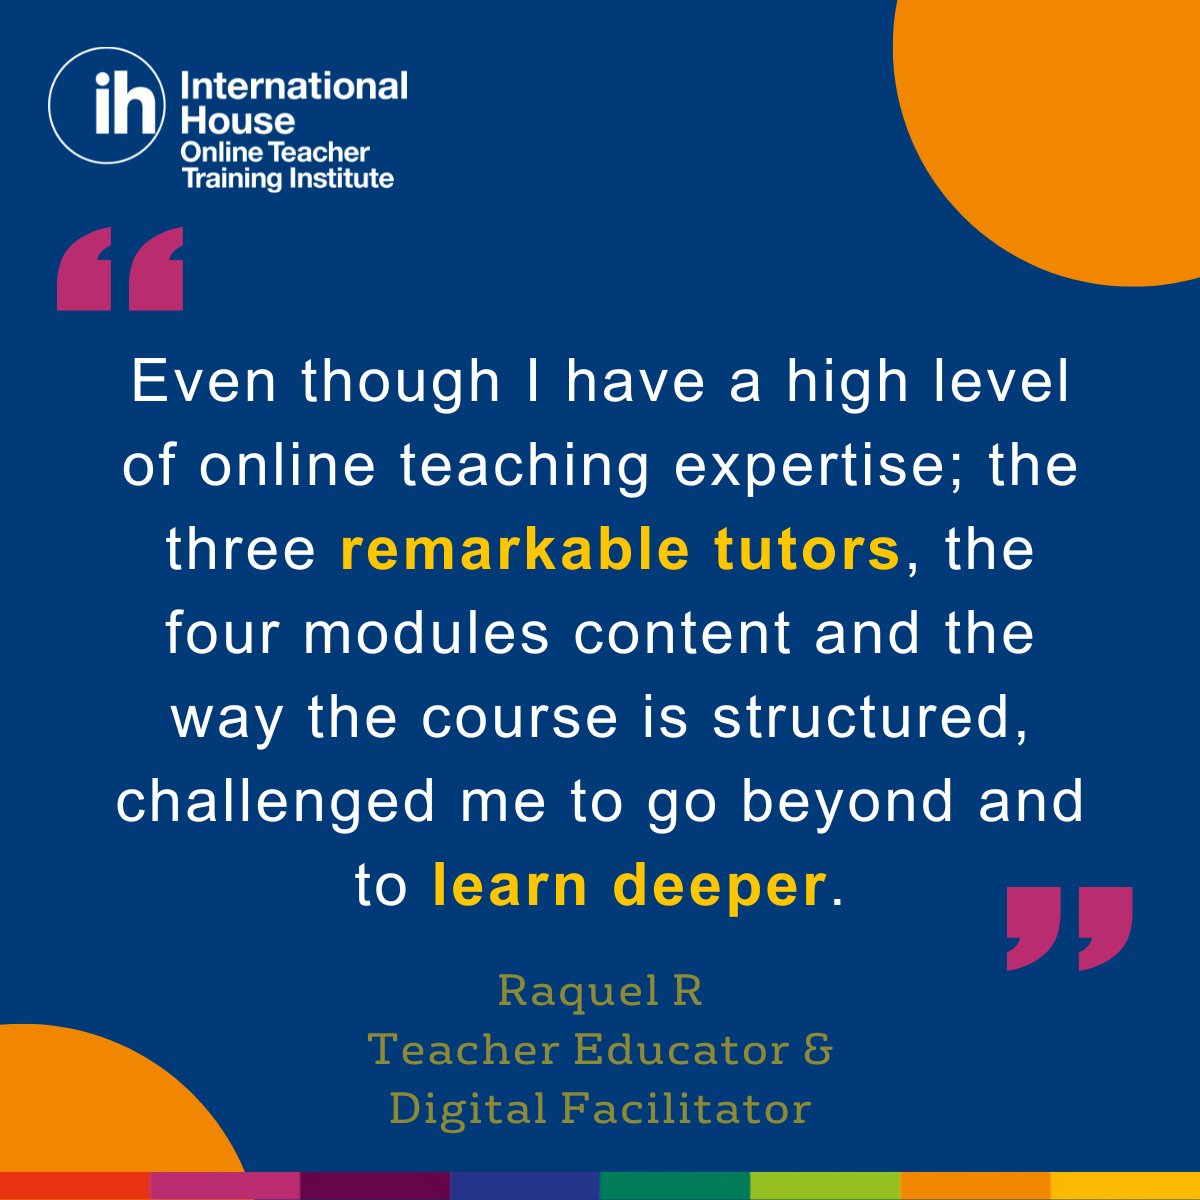 There’s still time to apply for the IH COLT course starting on 27th April 2024.

Learn more and apply here 👇 ihteachenglish.com/course/3184

#OnlineTutoring #EModerator #LanguageTeaching #CPD #ihotti